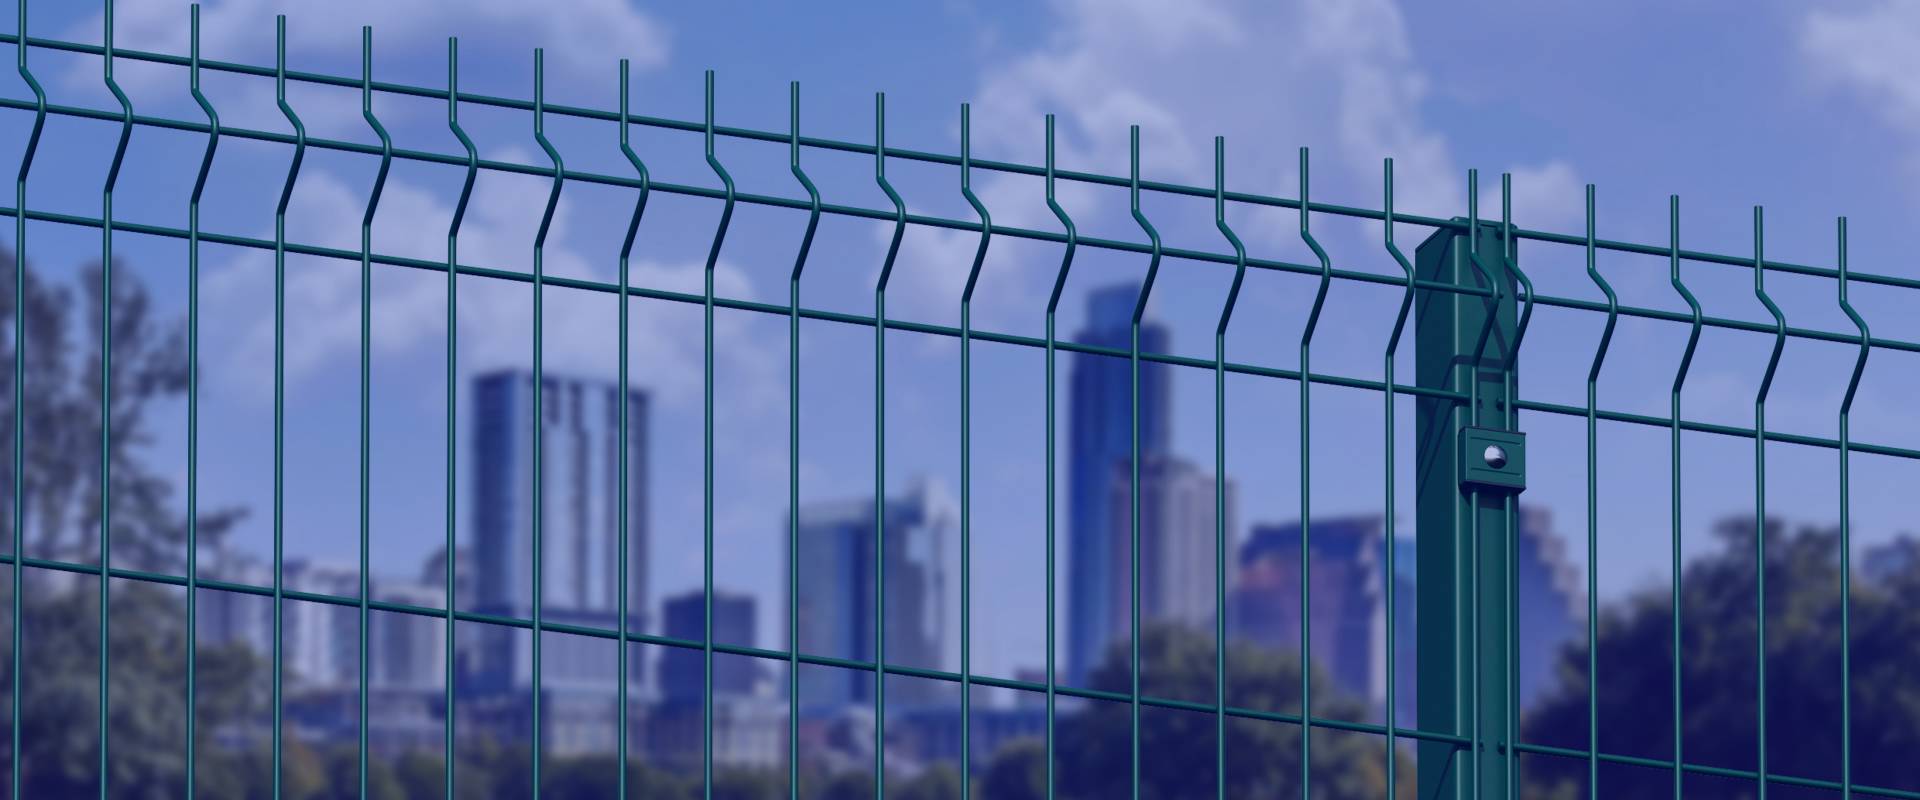 Green Curved welded wire mesh fences are surrounding the grassland.